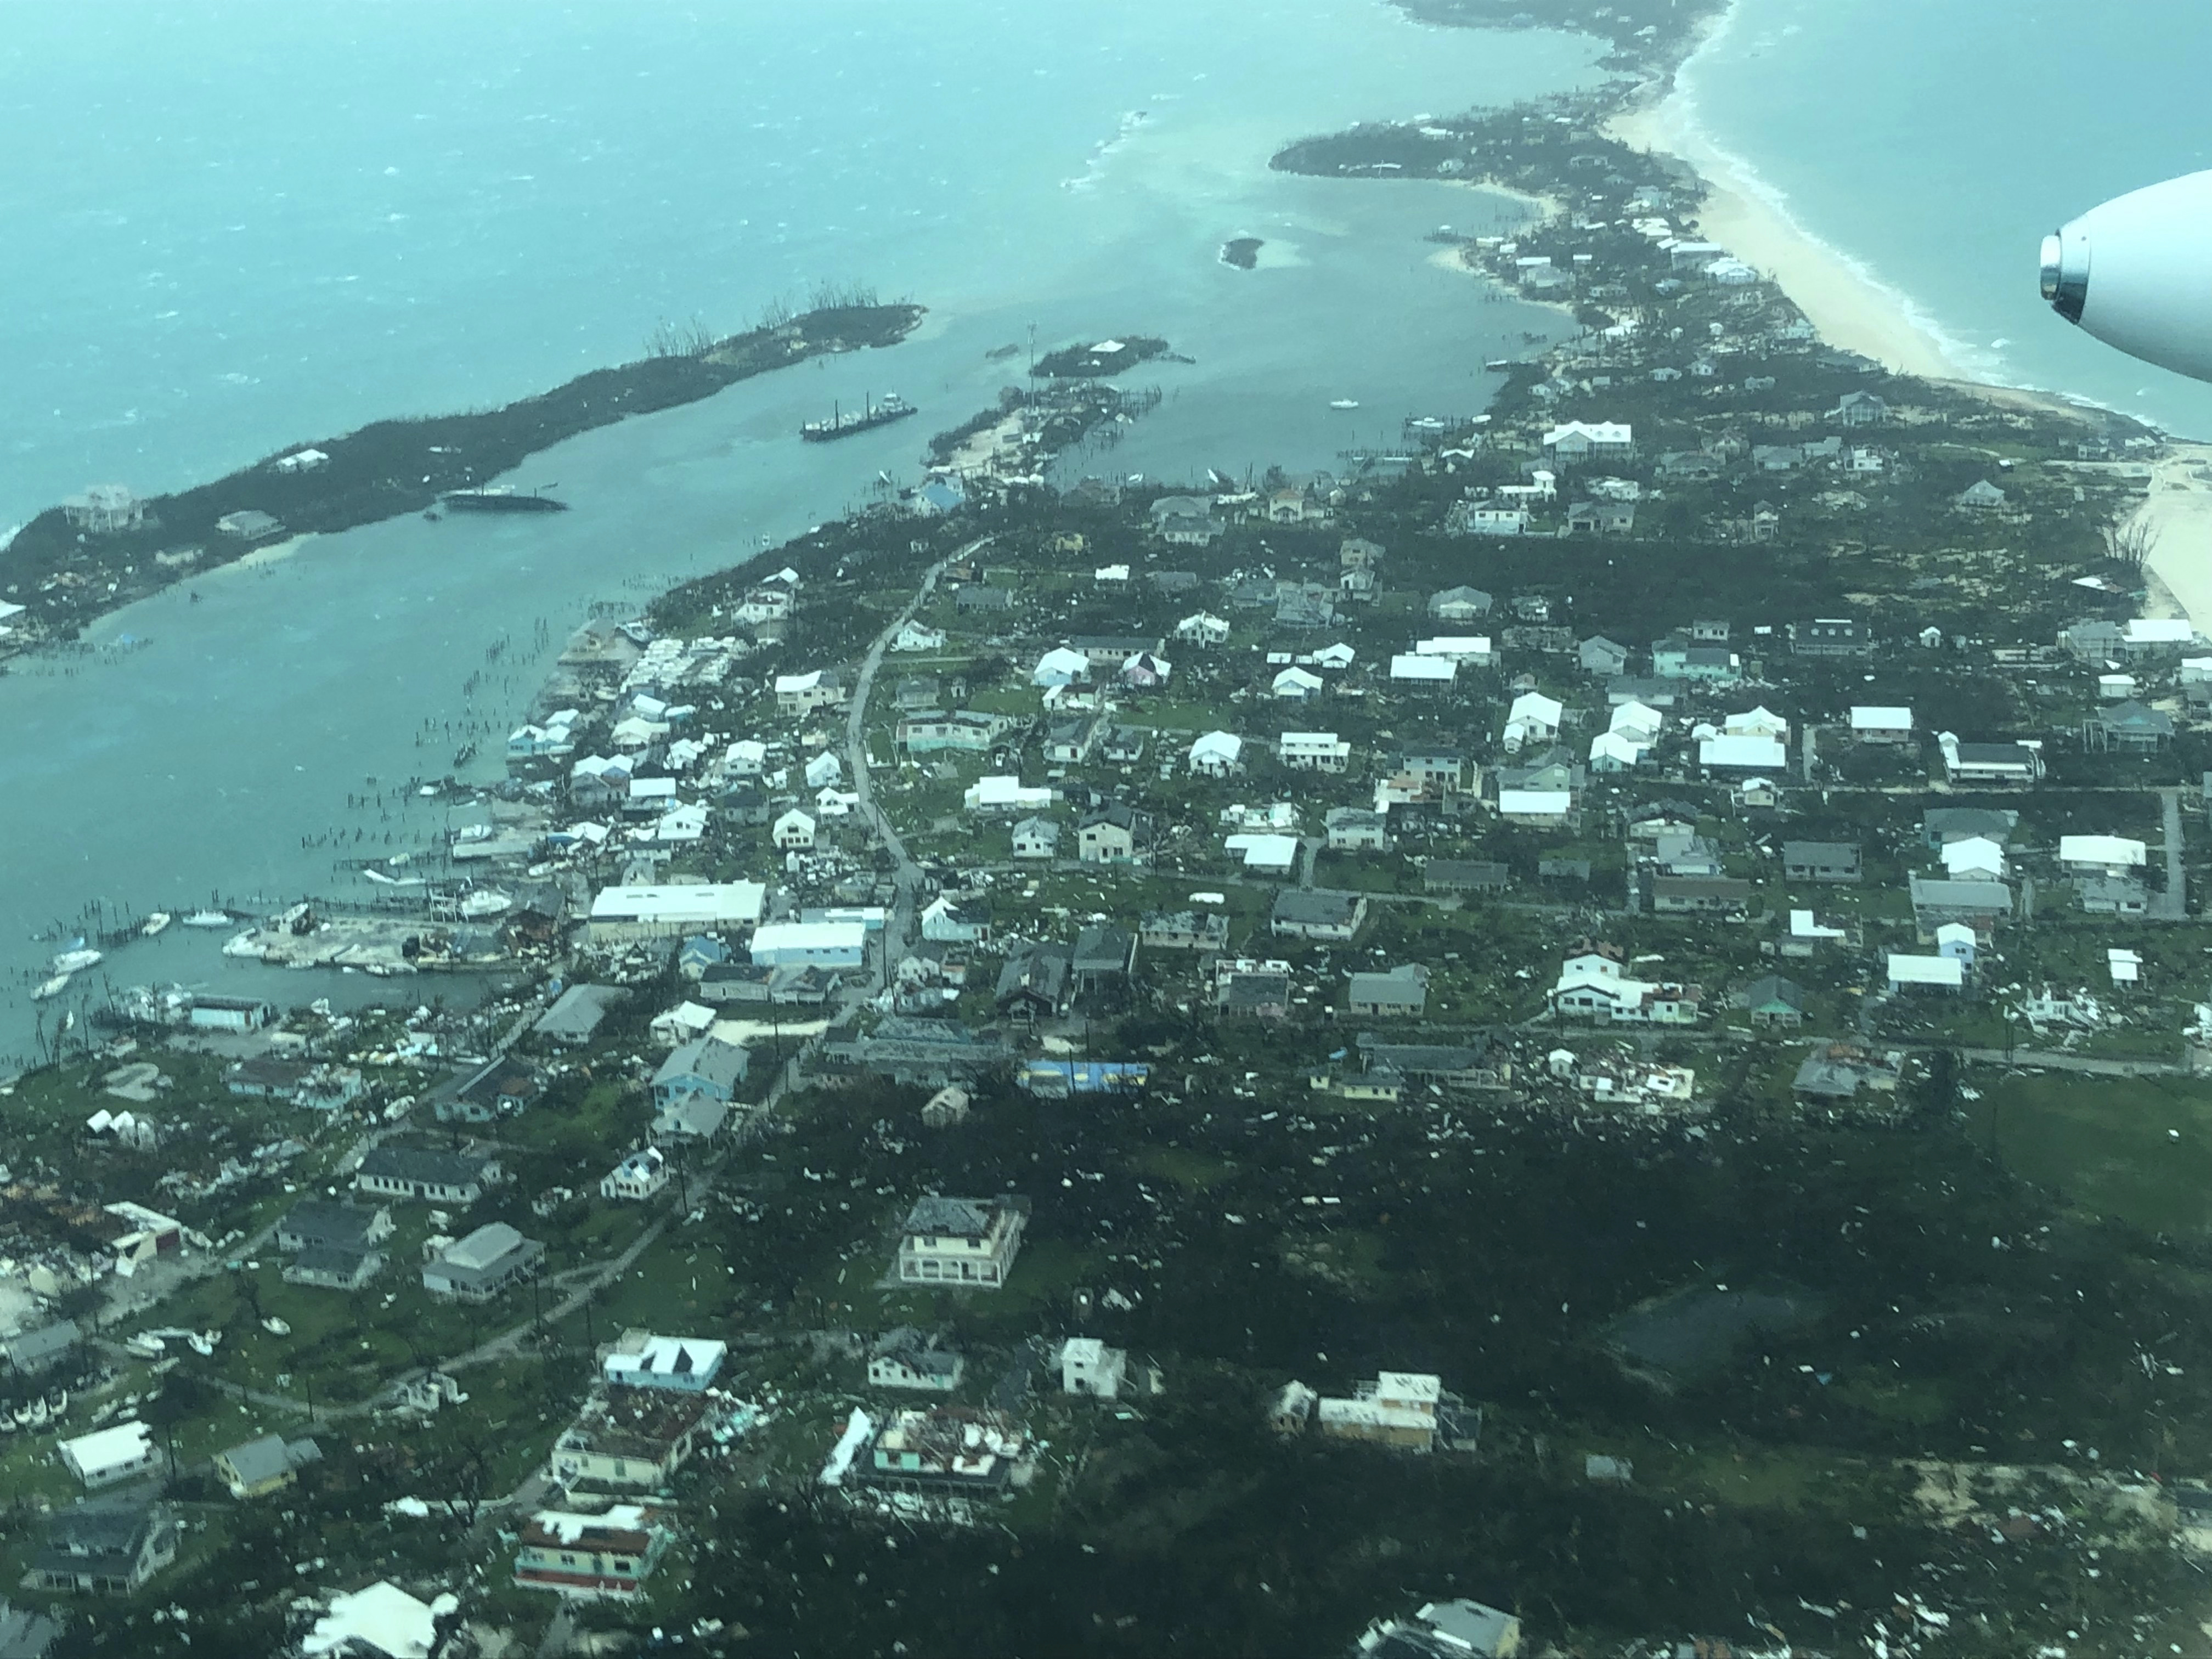 This aerial photo provided by Medic Corps shows the destruction brought by Hurricane Dorian on Man-o-War Cay, Bahama